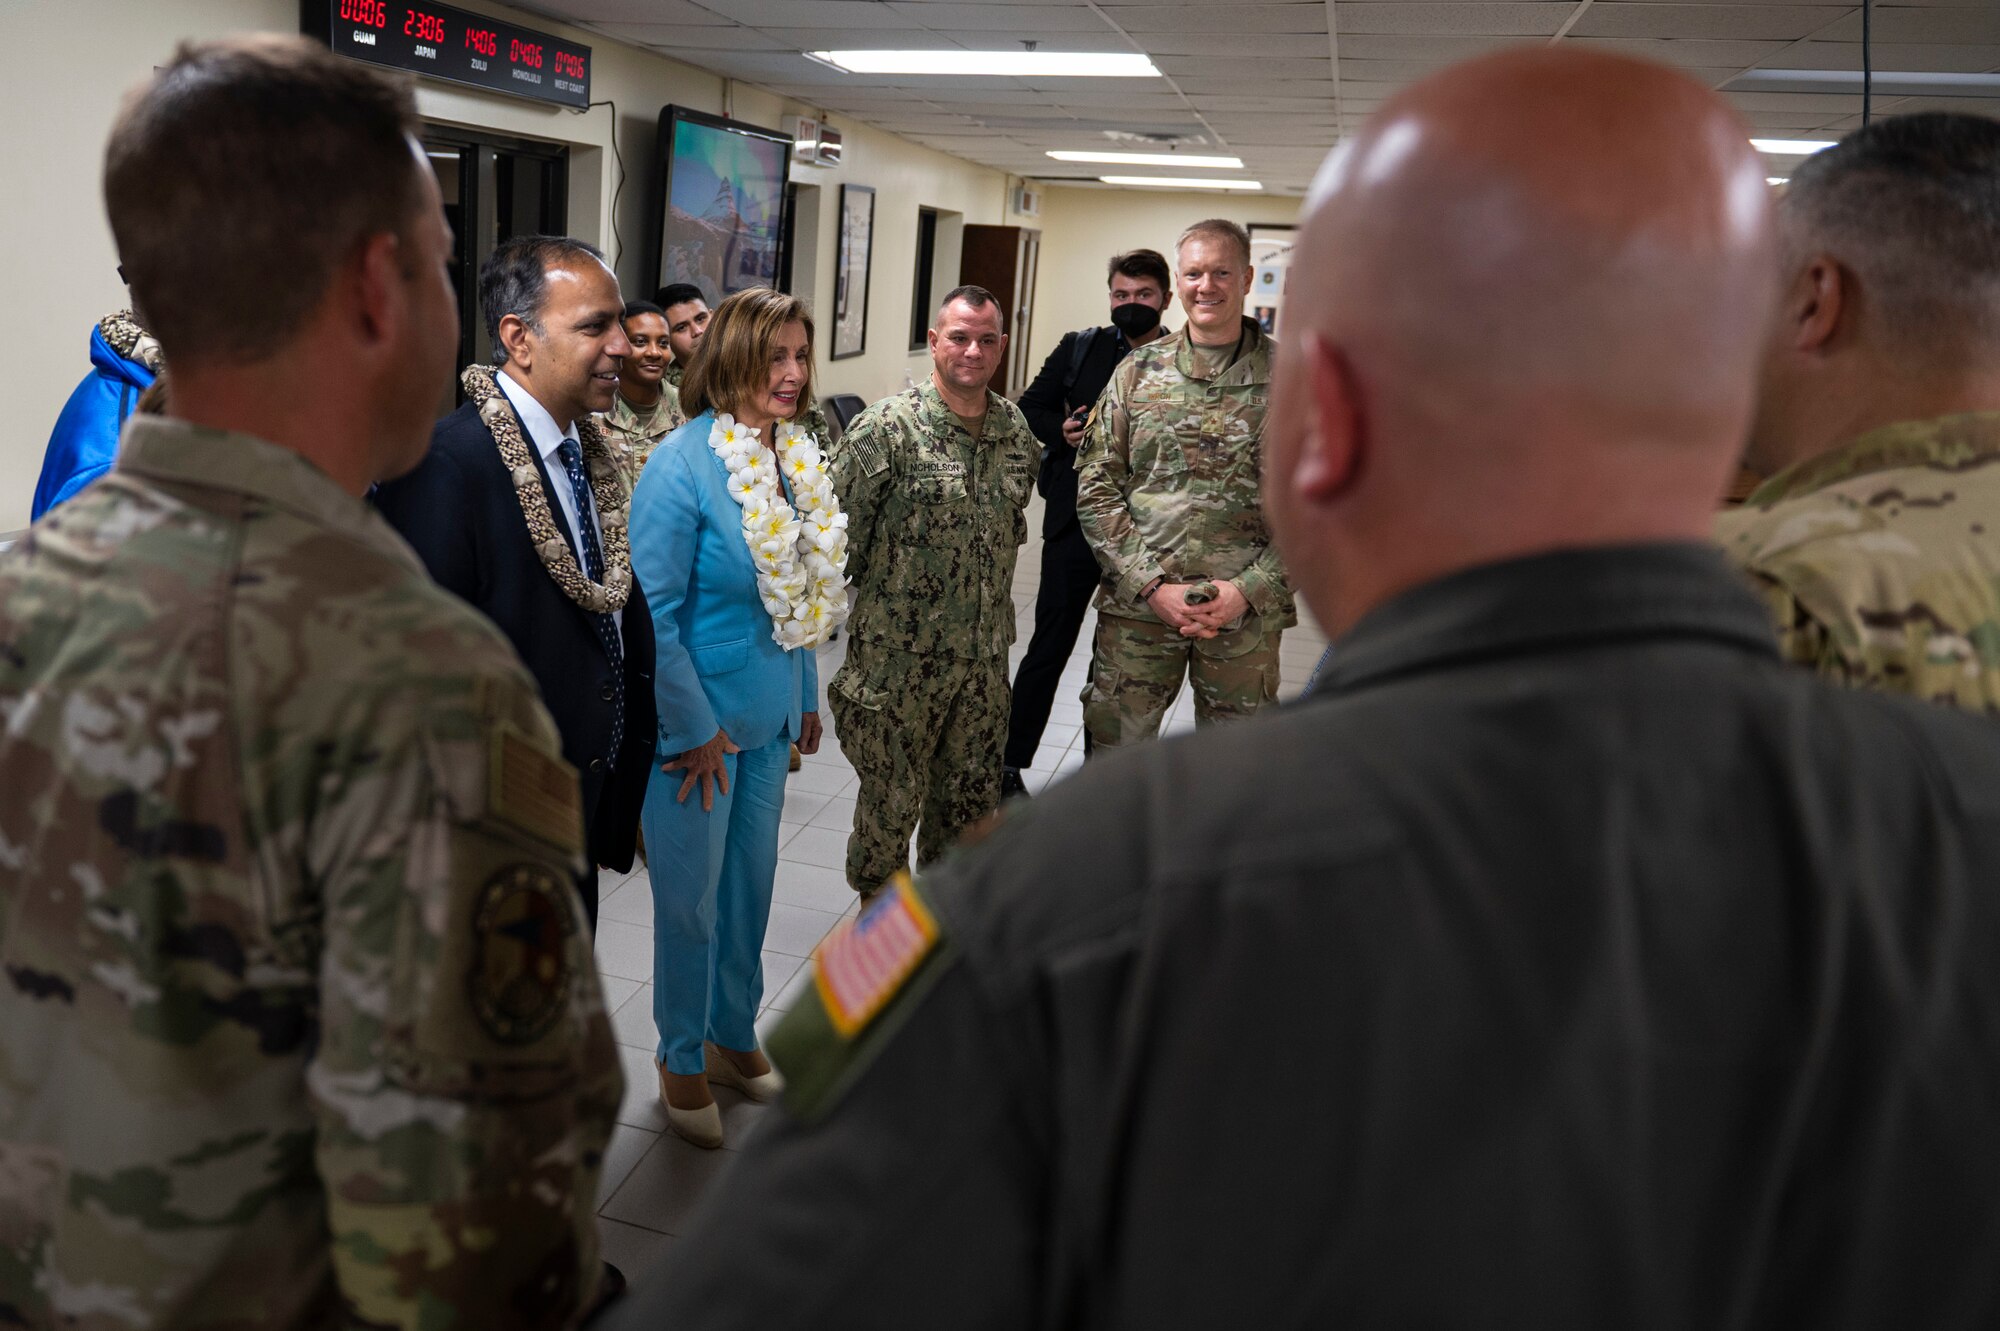 Representative Raja Krishnamoorthi and Speaker of the U.S. House of Representatives Nancy Pelosi, speak with members of Team Andersen during a visit at Andersen Air Force Base, Guam, July 31, 2022. Pelosi’s visit focused on bilateral relationships, security cooperation and climate change. (U.S. Air Force photo by Staff Sgt. Suzie Plotnikov)